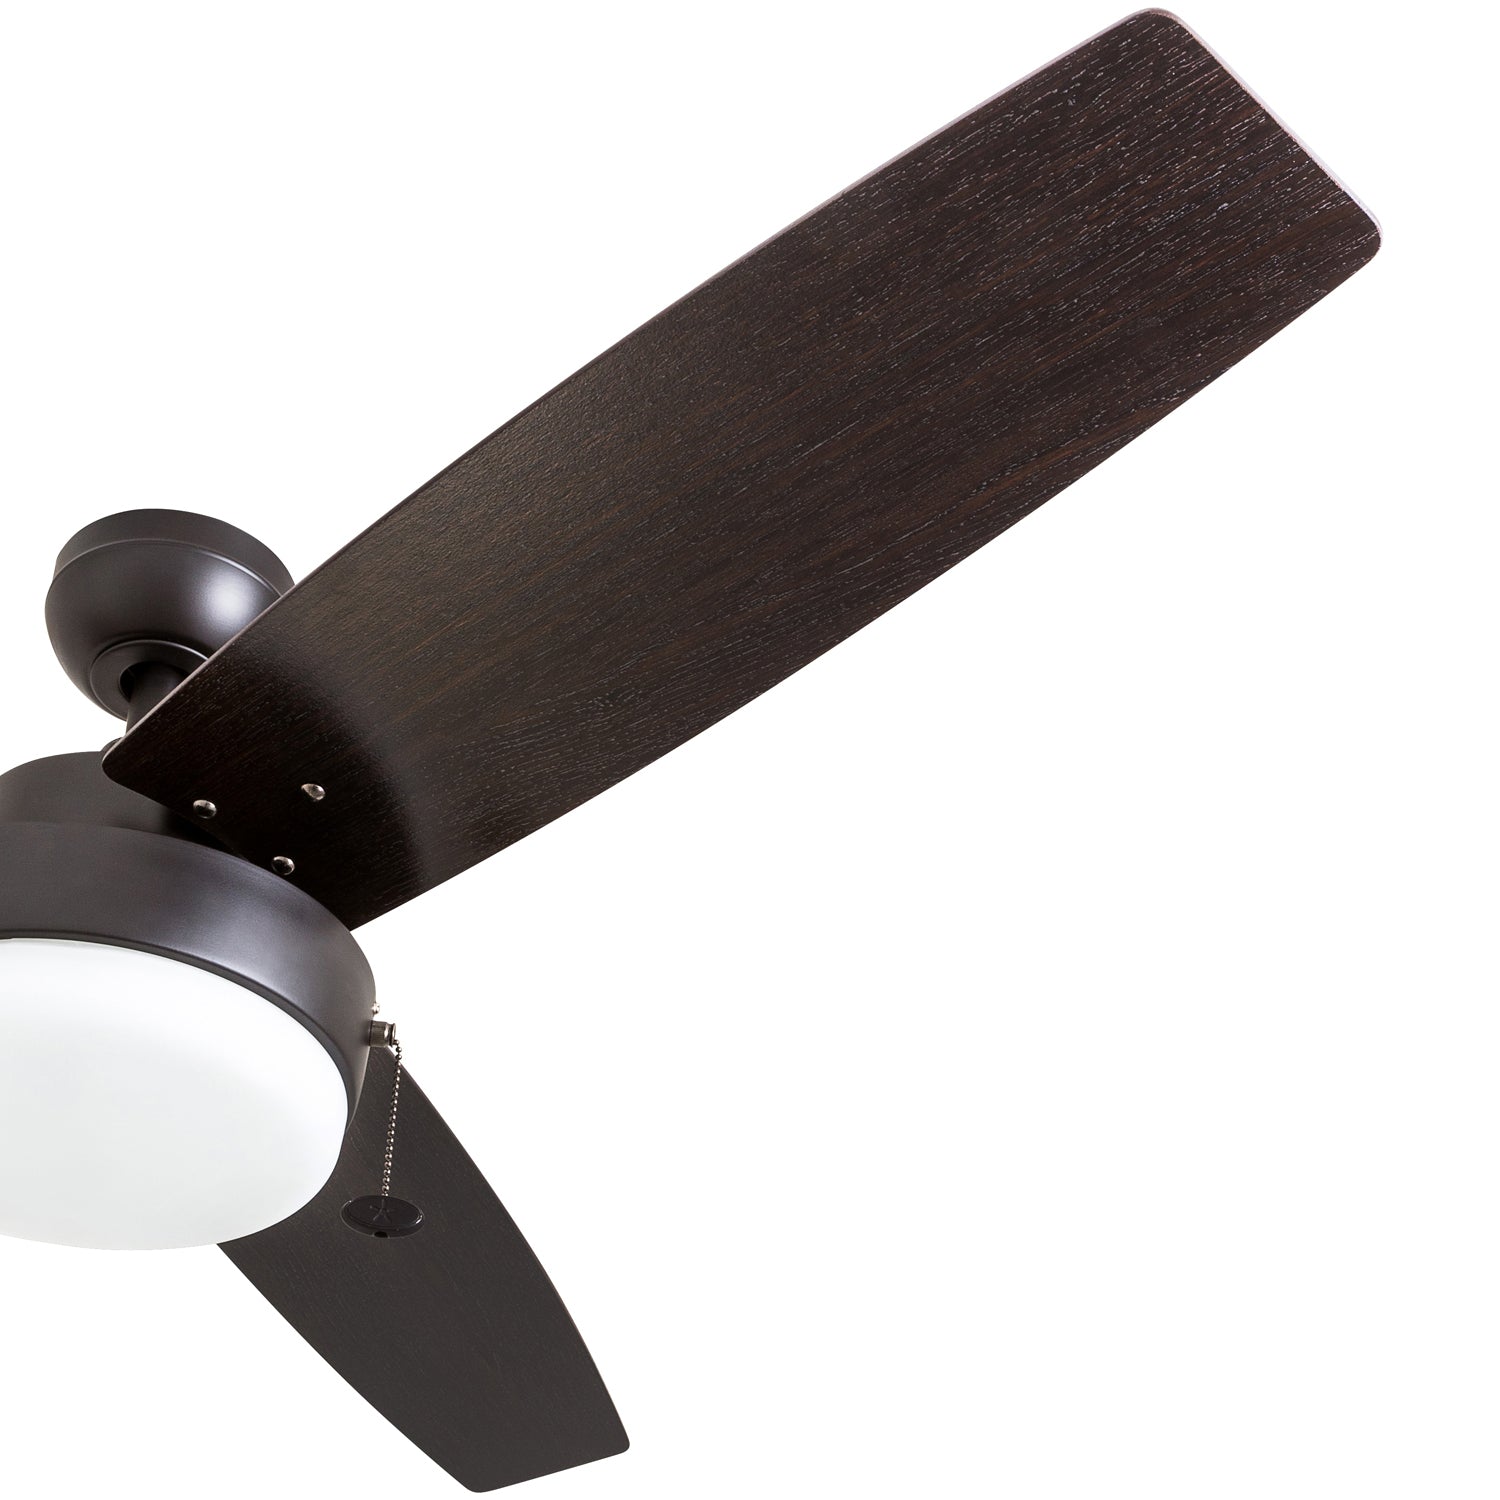 52 Inch Statham, Espresso, Pull Chain, Ceiling Fan by Prominence Home